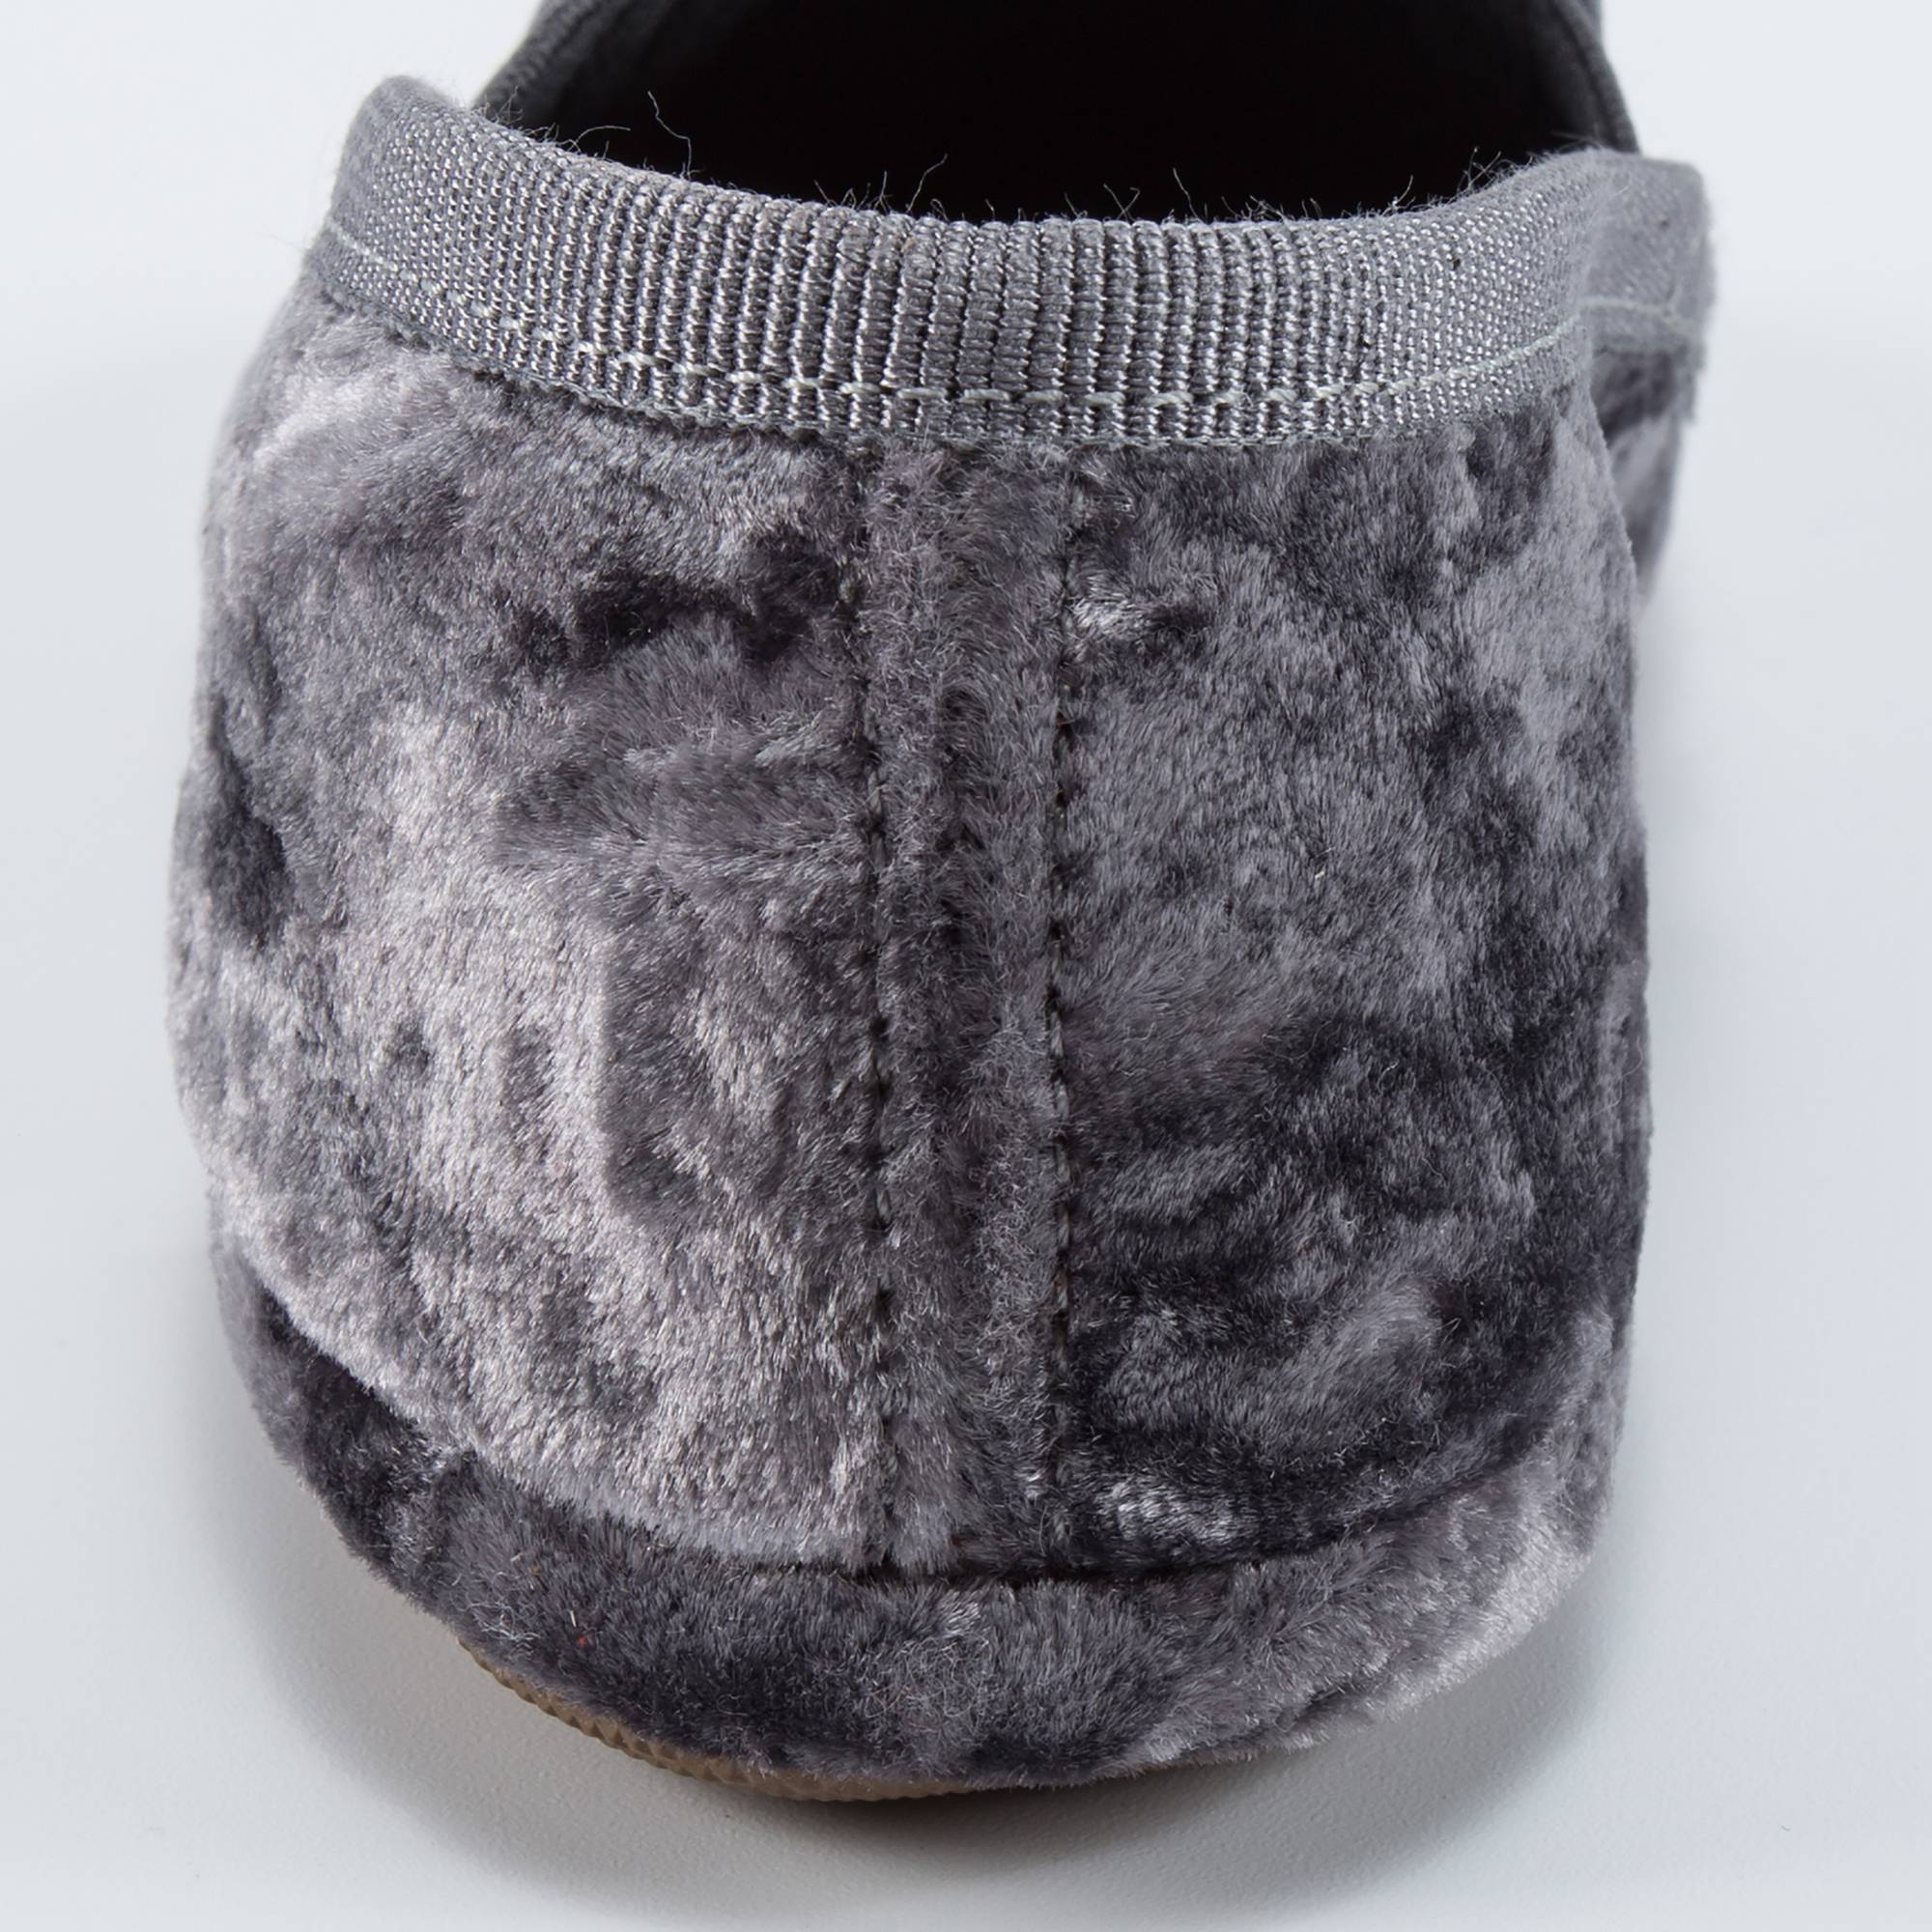 Girls Grey Loafers